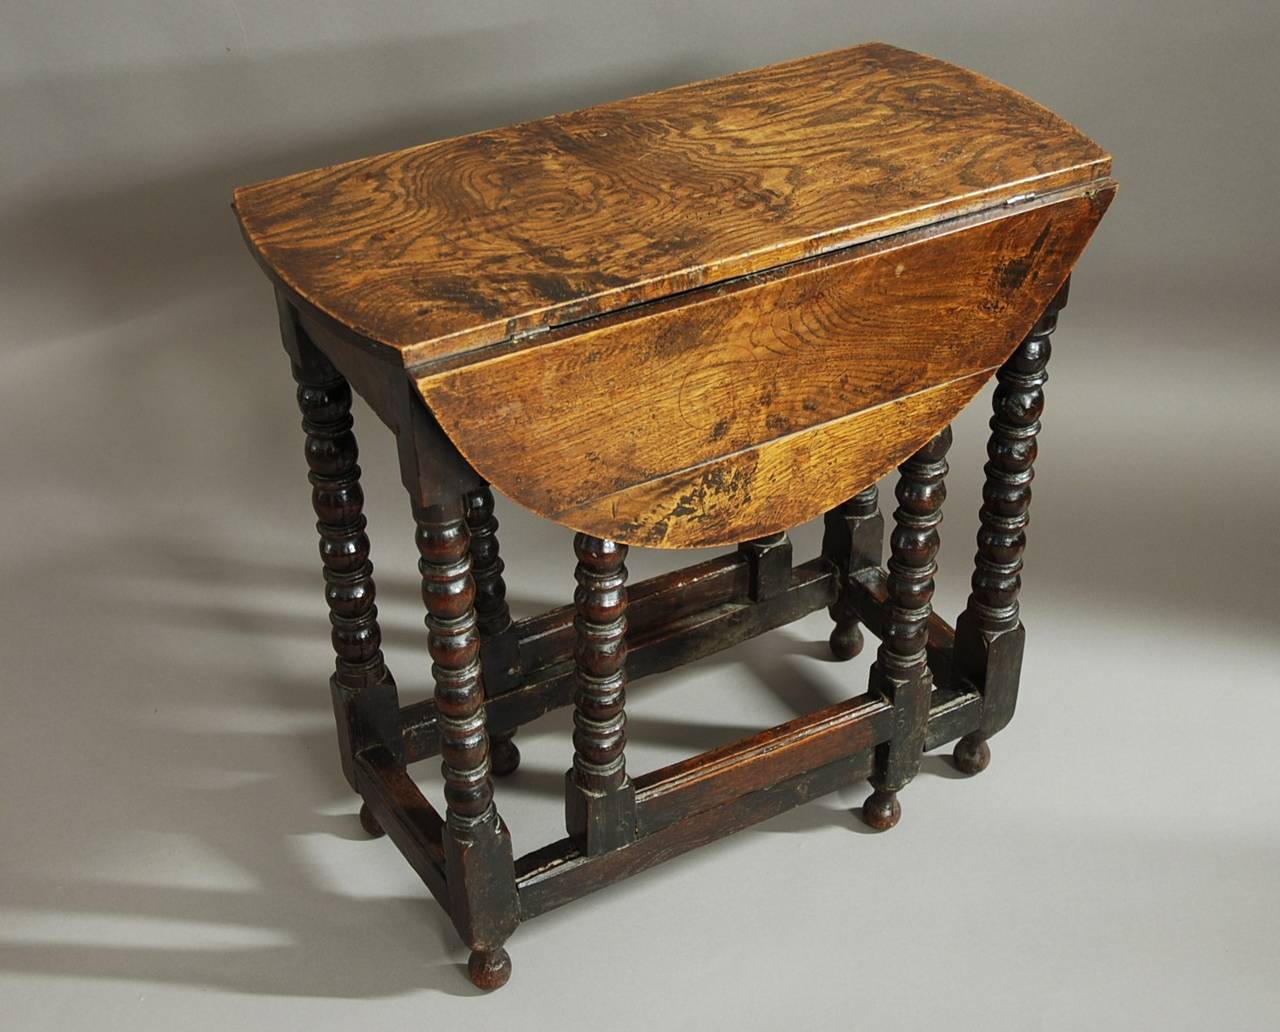 Rare 17th Century Gateleg Table of Small Proportions 1